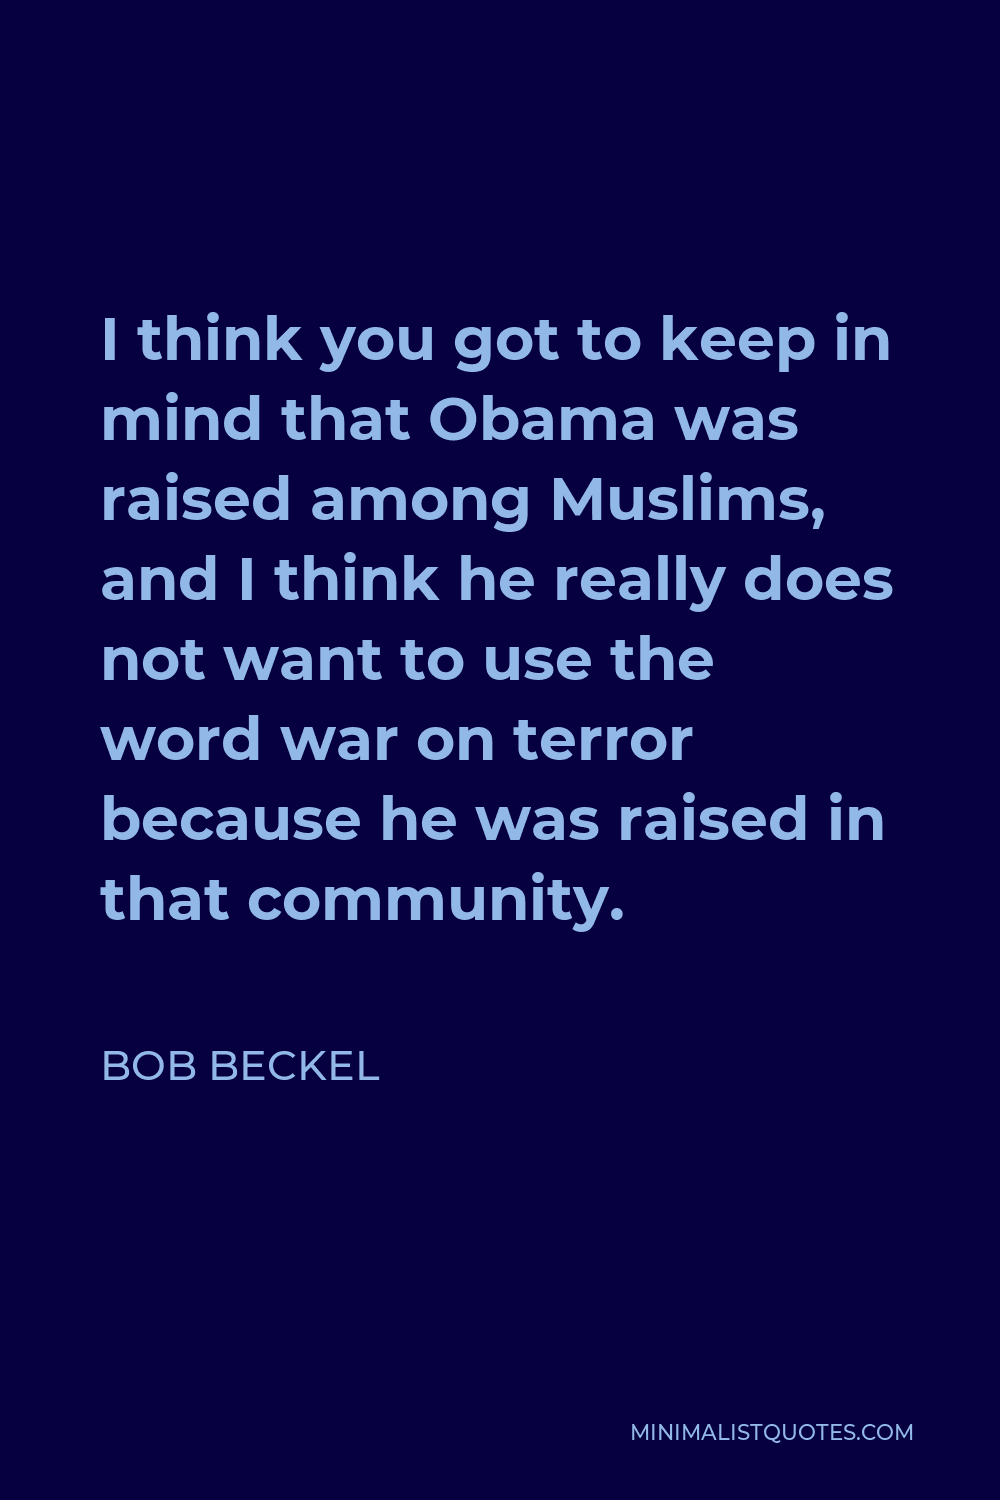 Bob Beckel Quote - I think you got to keep in mind that Obama was raised among Muslims, and I think he really does not want to use the word war on terror because he was raised in that community.